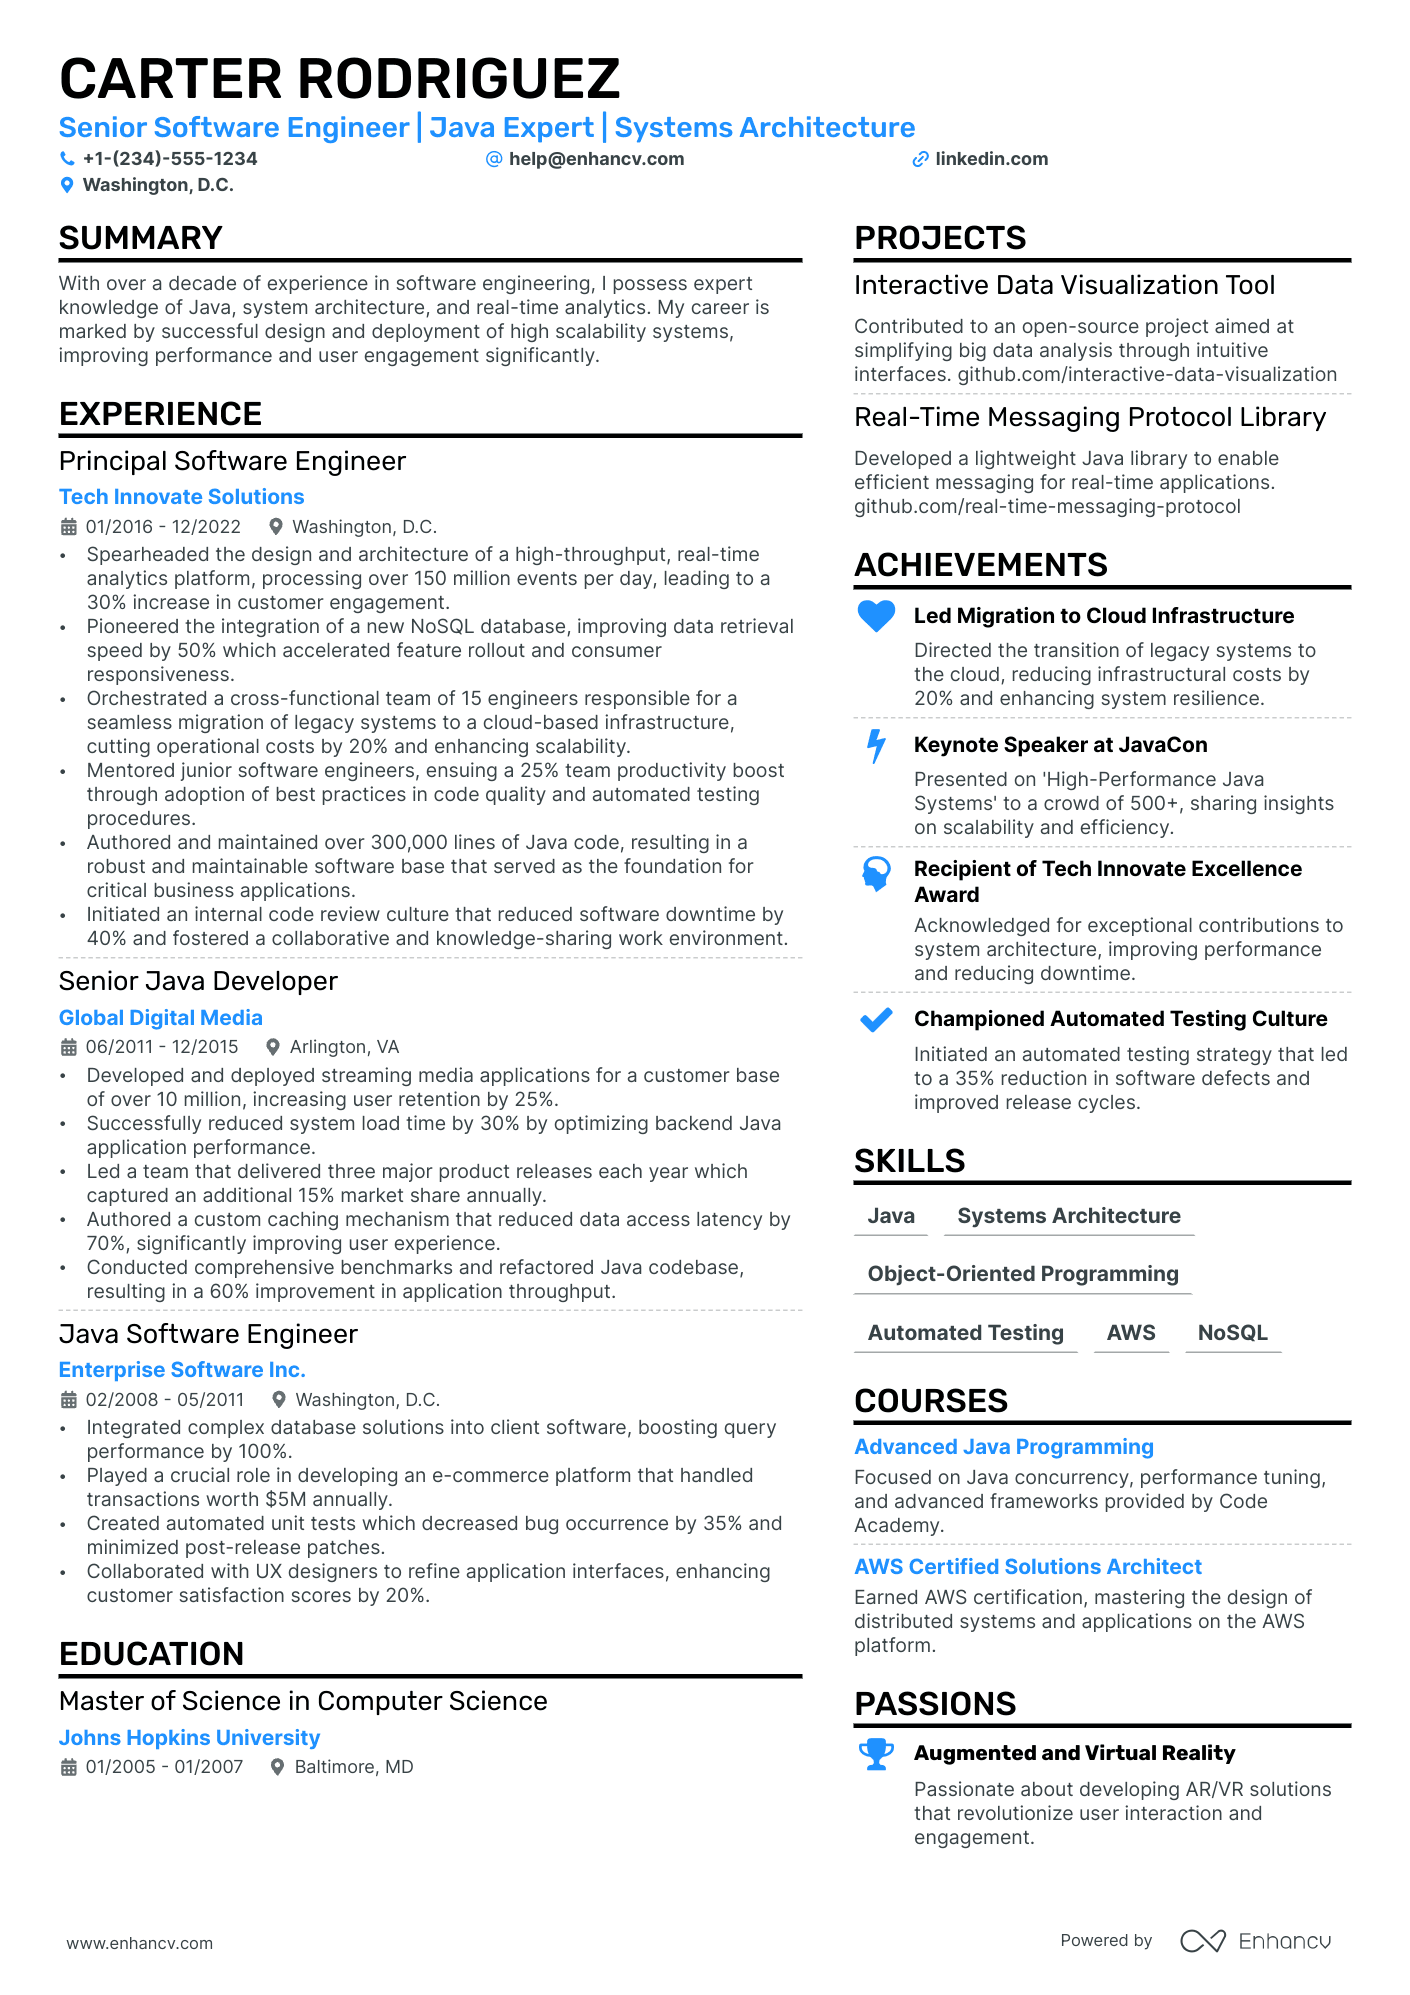 professional summary resume examples for software developer